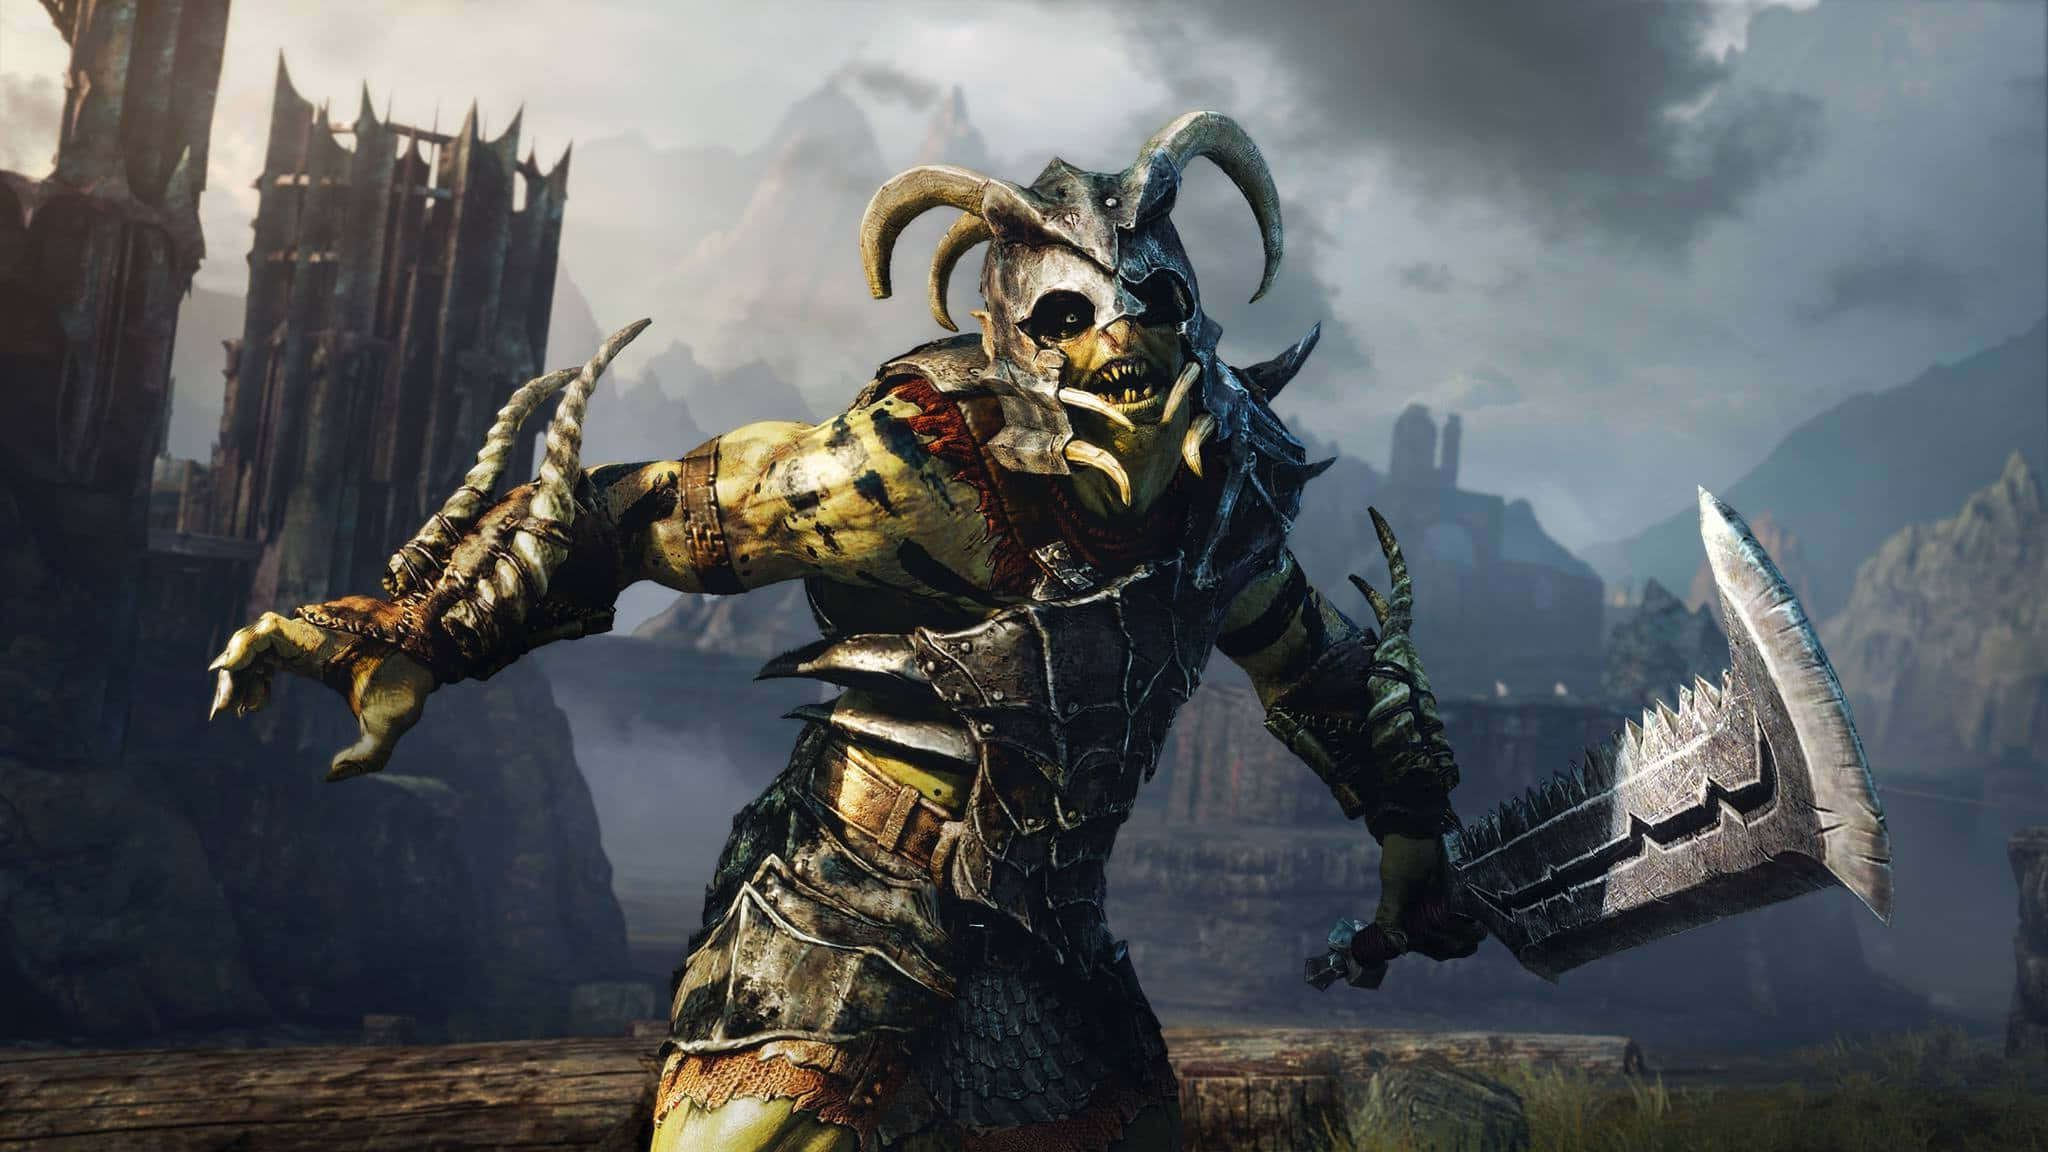 Explore Middle-earth and battle the forces of Sauron in Best Shadow of Mordor.